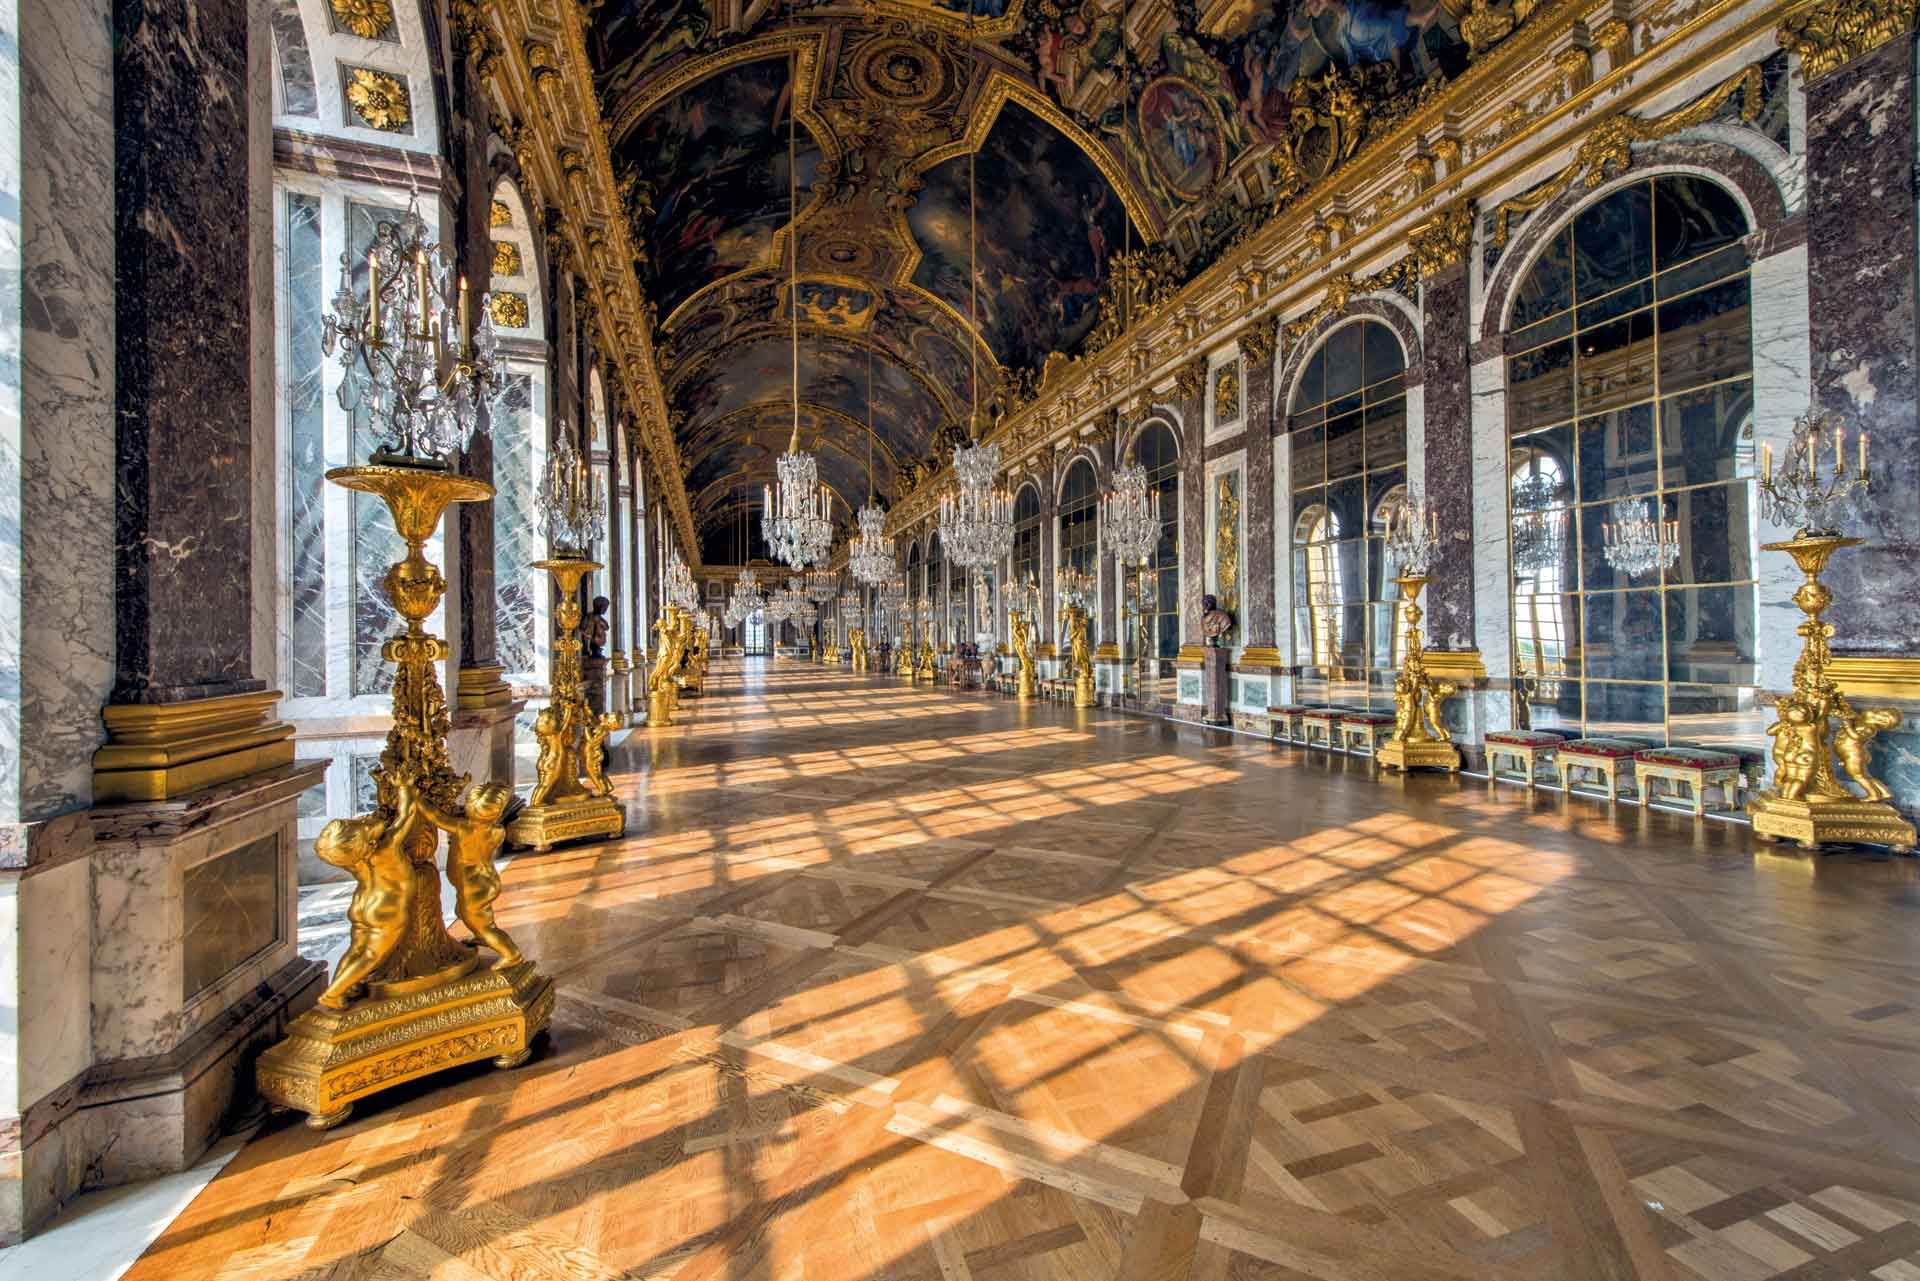 Amazing Gallery Inside the Palace of Versailles